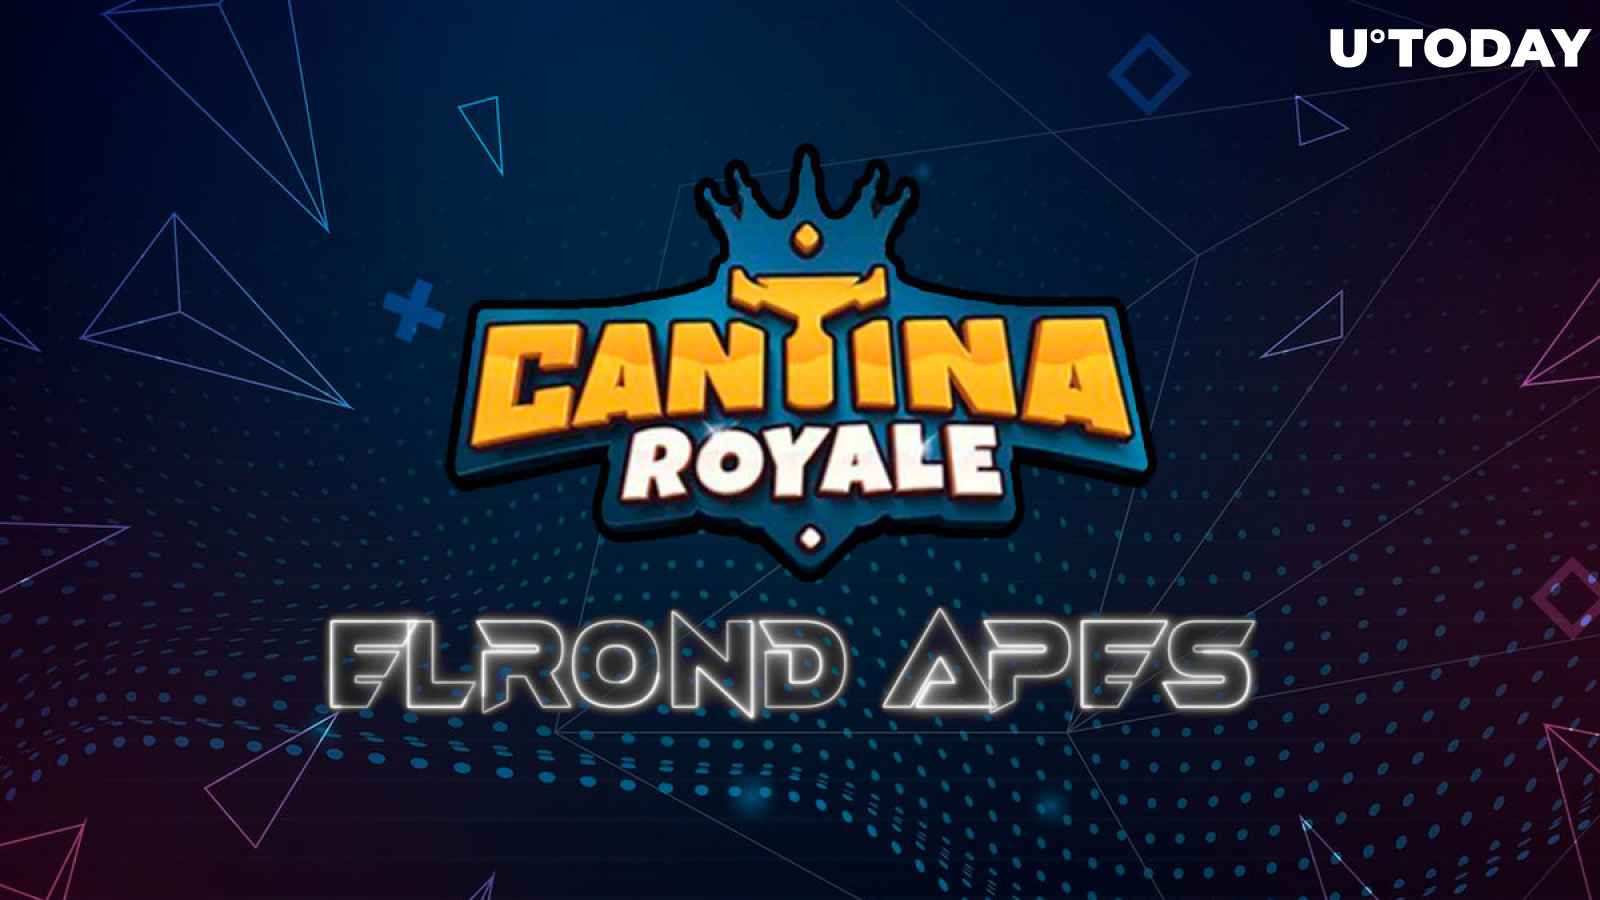 Elrond Apes NFT Collection Integrated into Cantina Royale Game